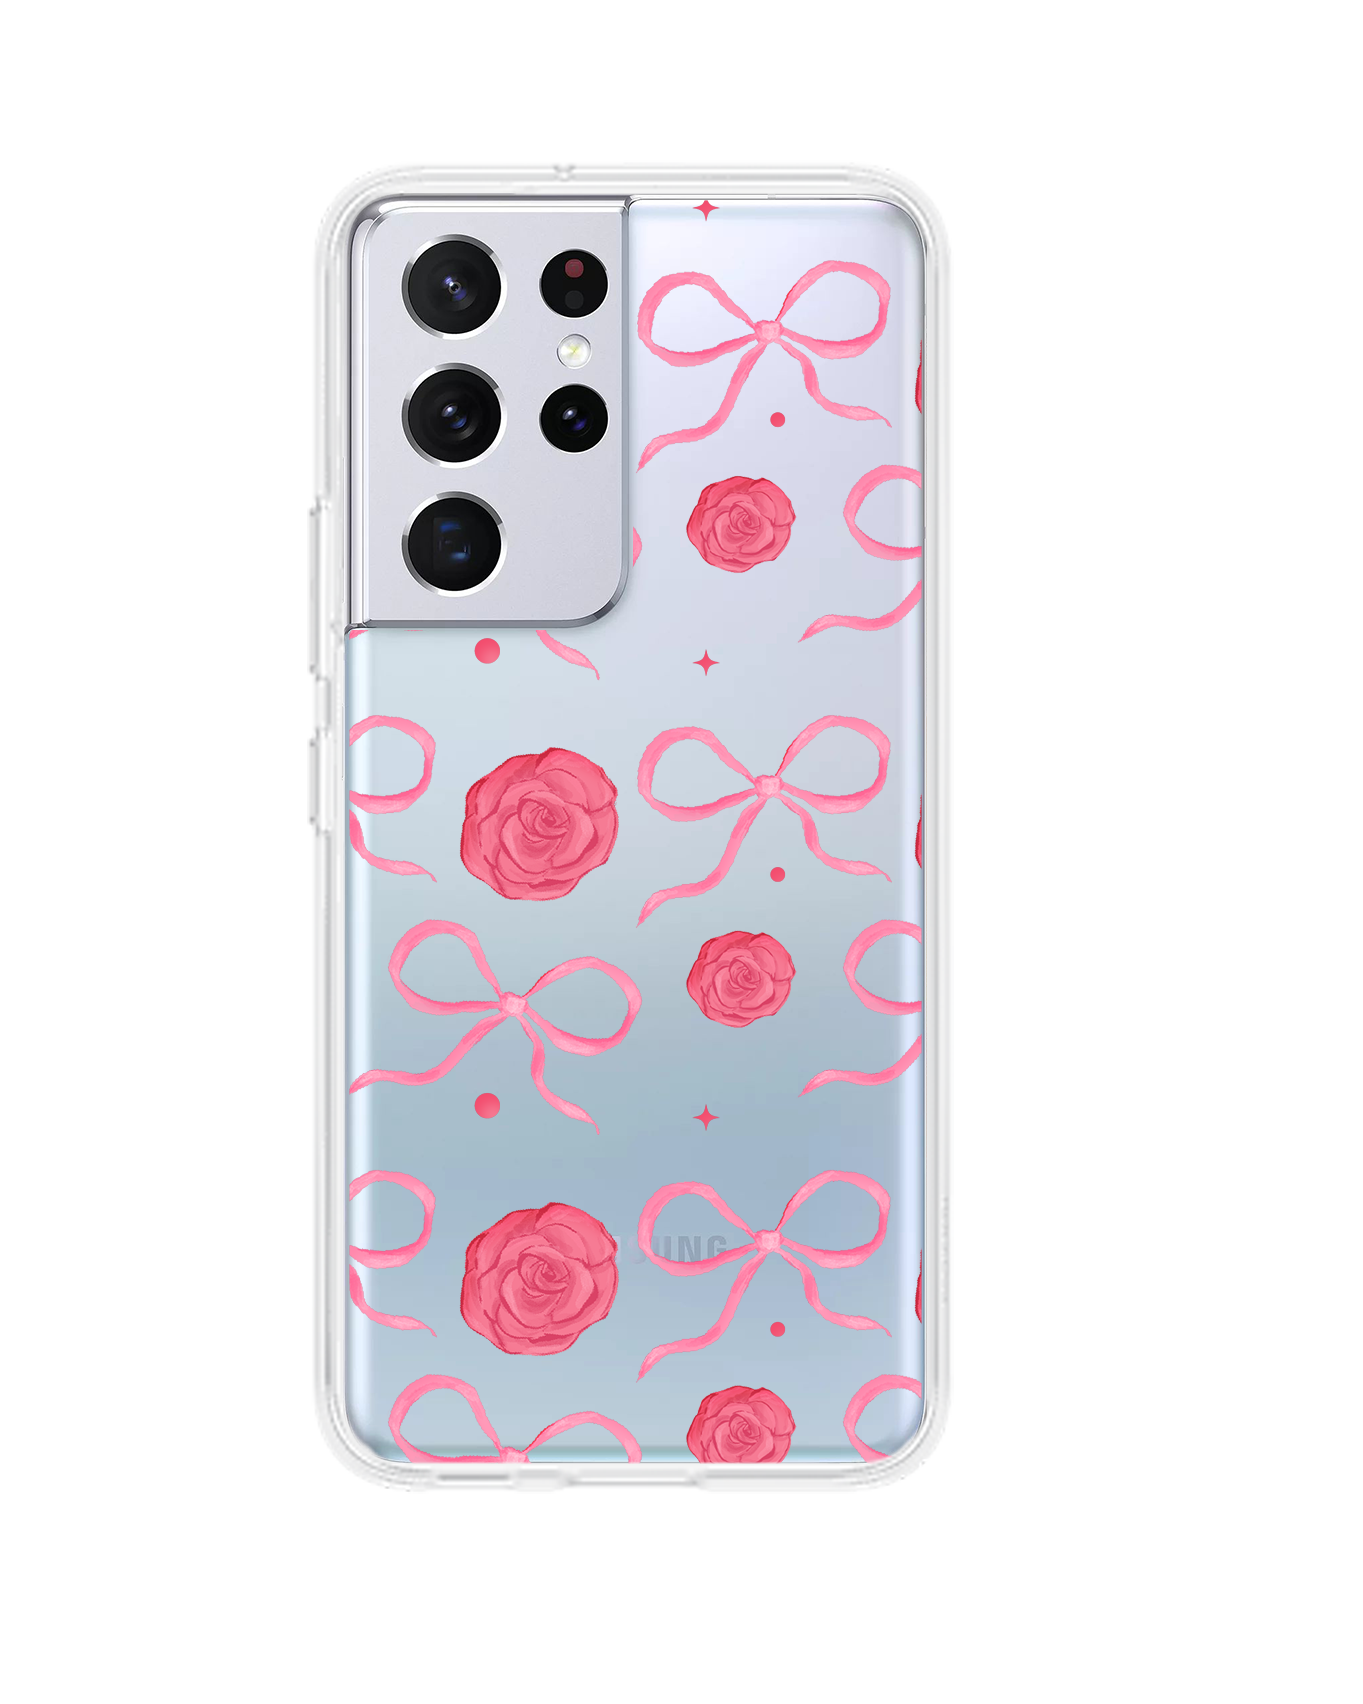 Android Rearguard Hybrid Case - Coquette Rose